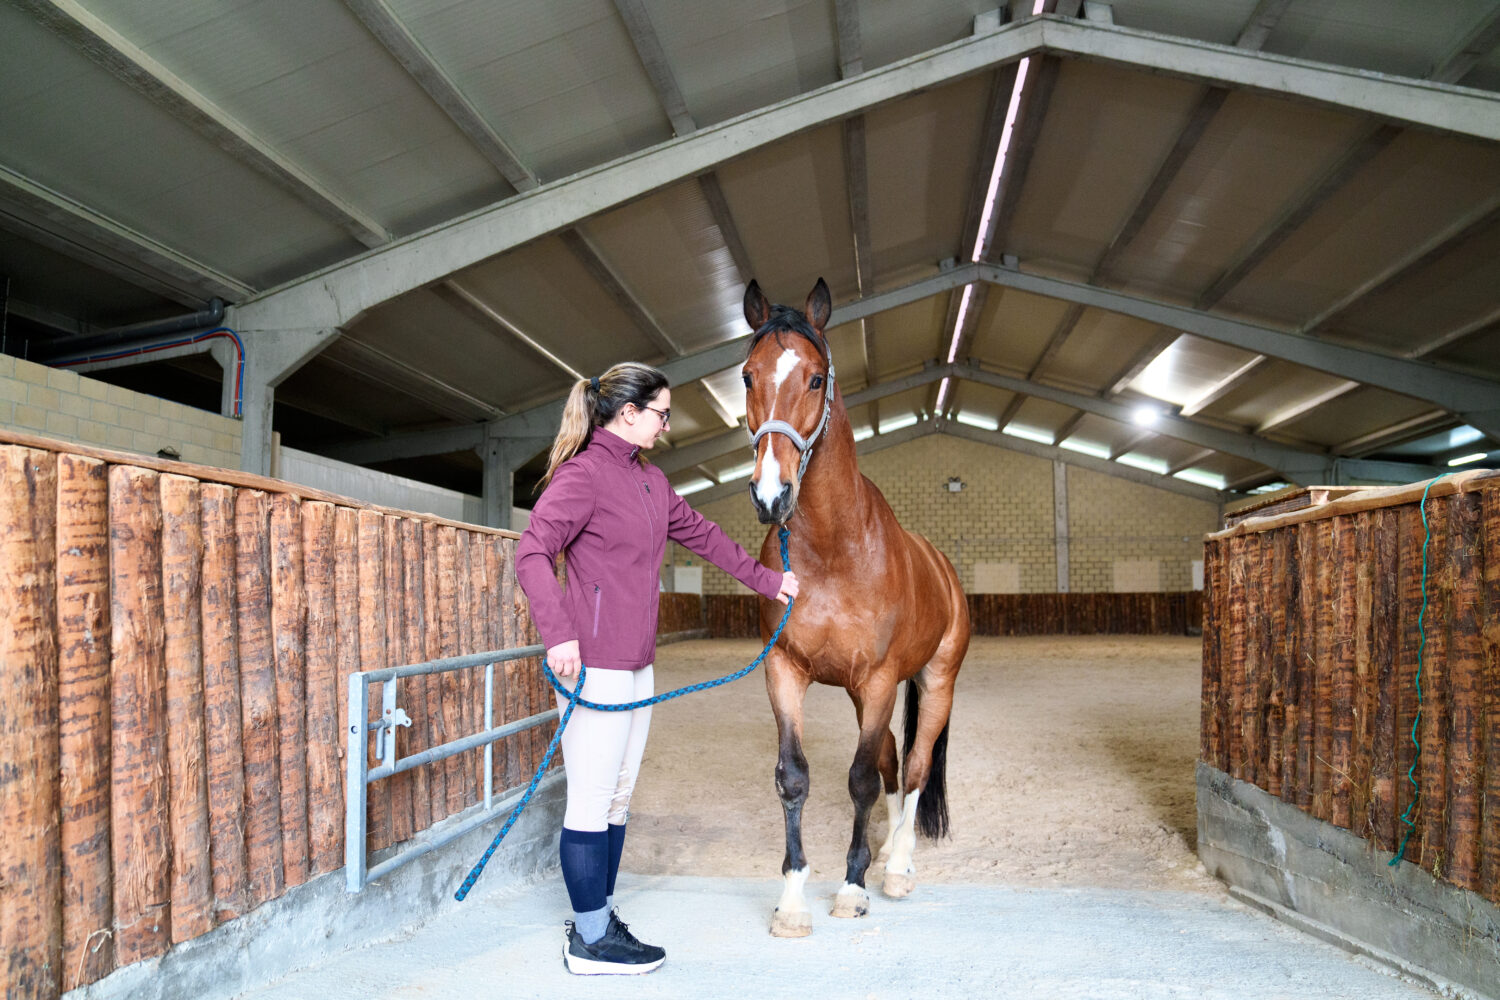 Utilize Horse Barn Management to Successfully Grow Your Barn